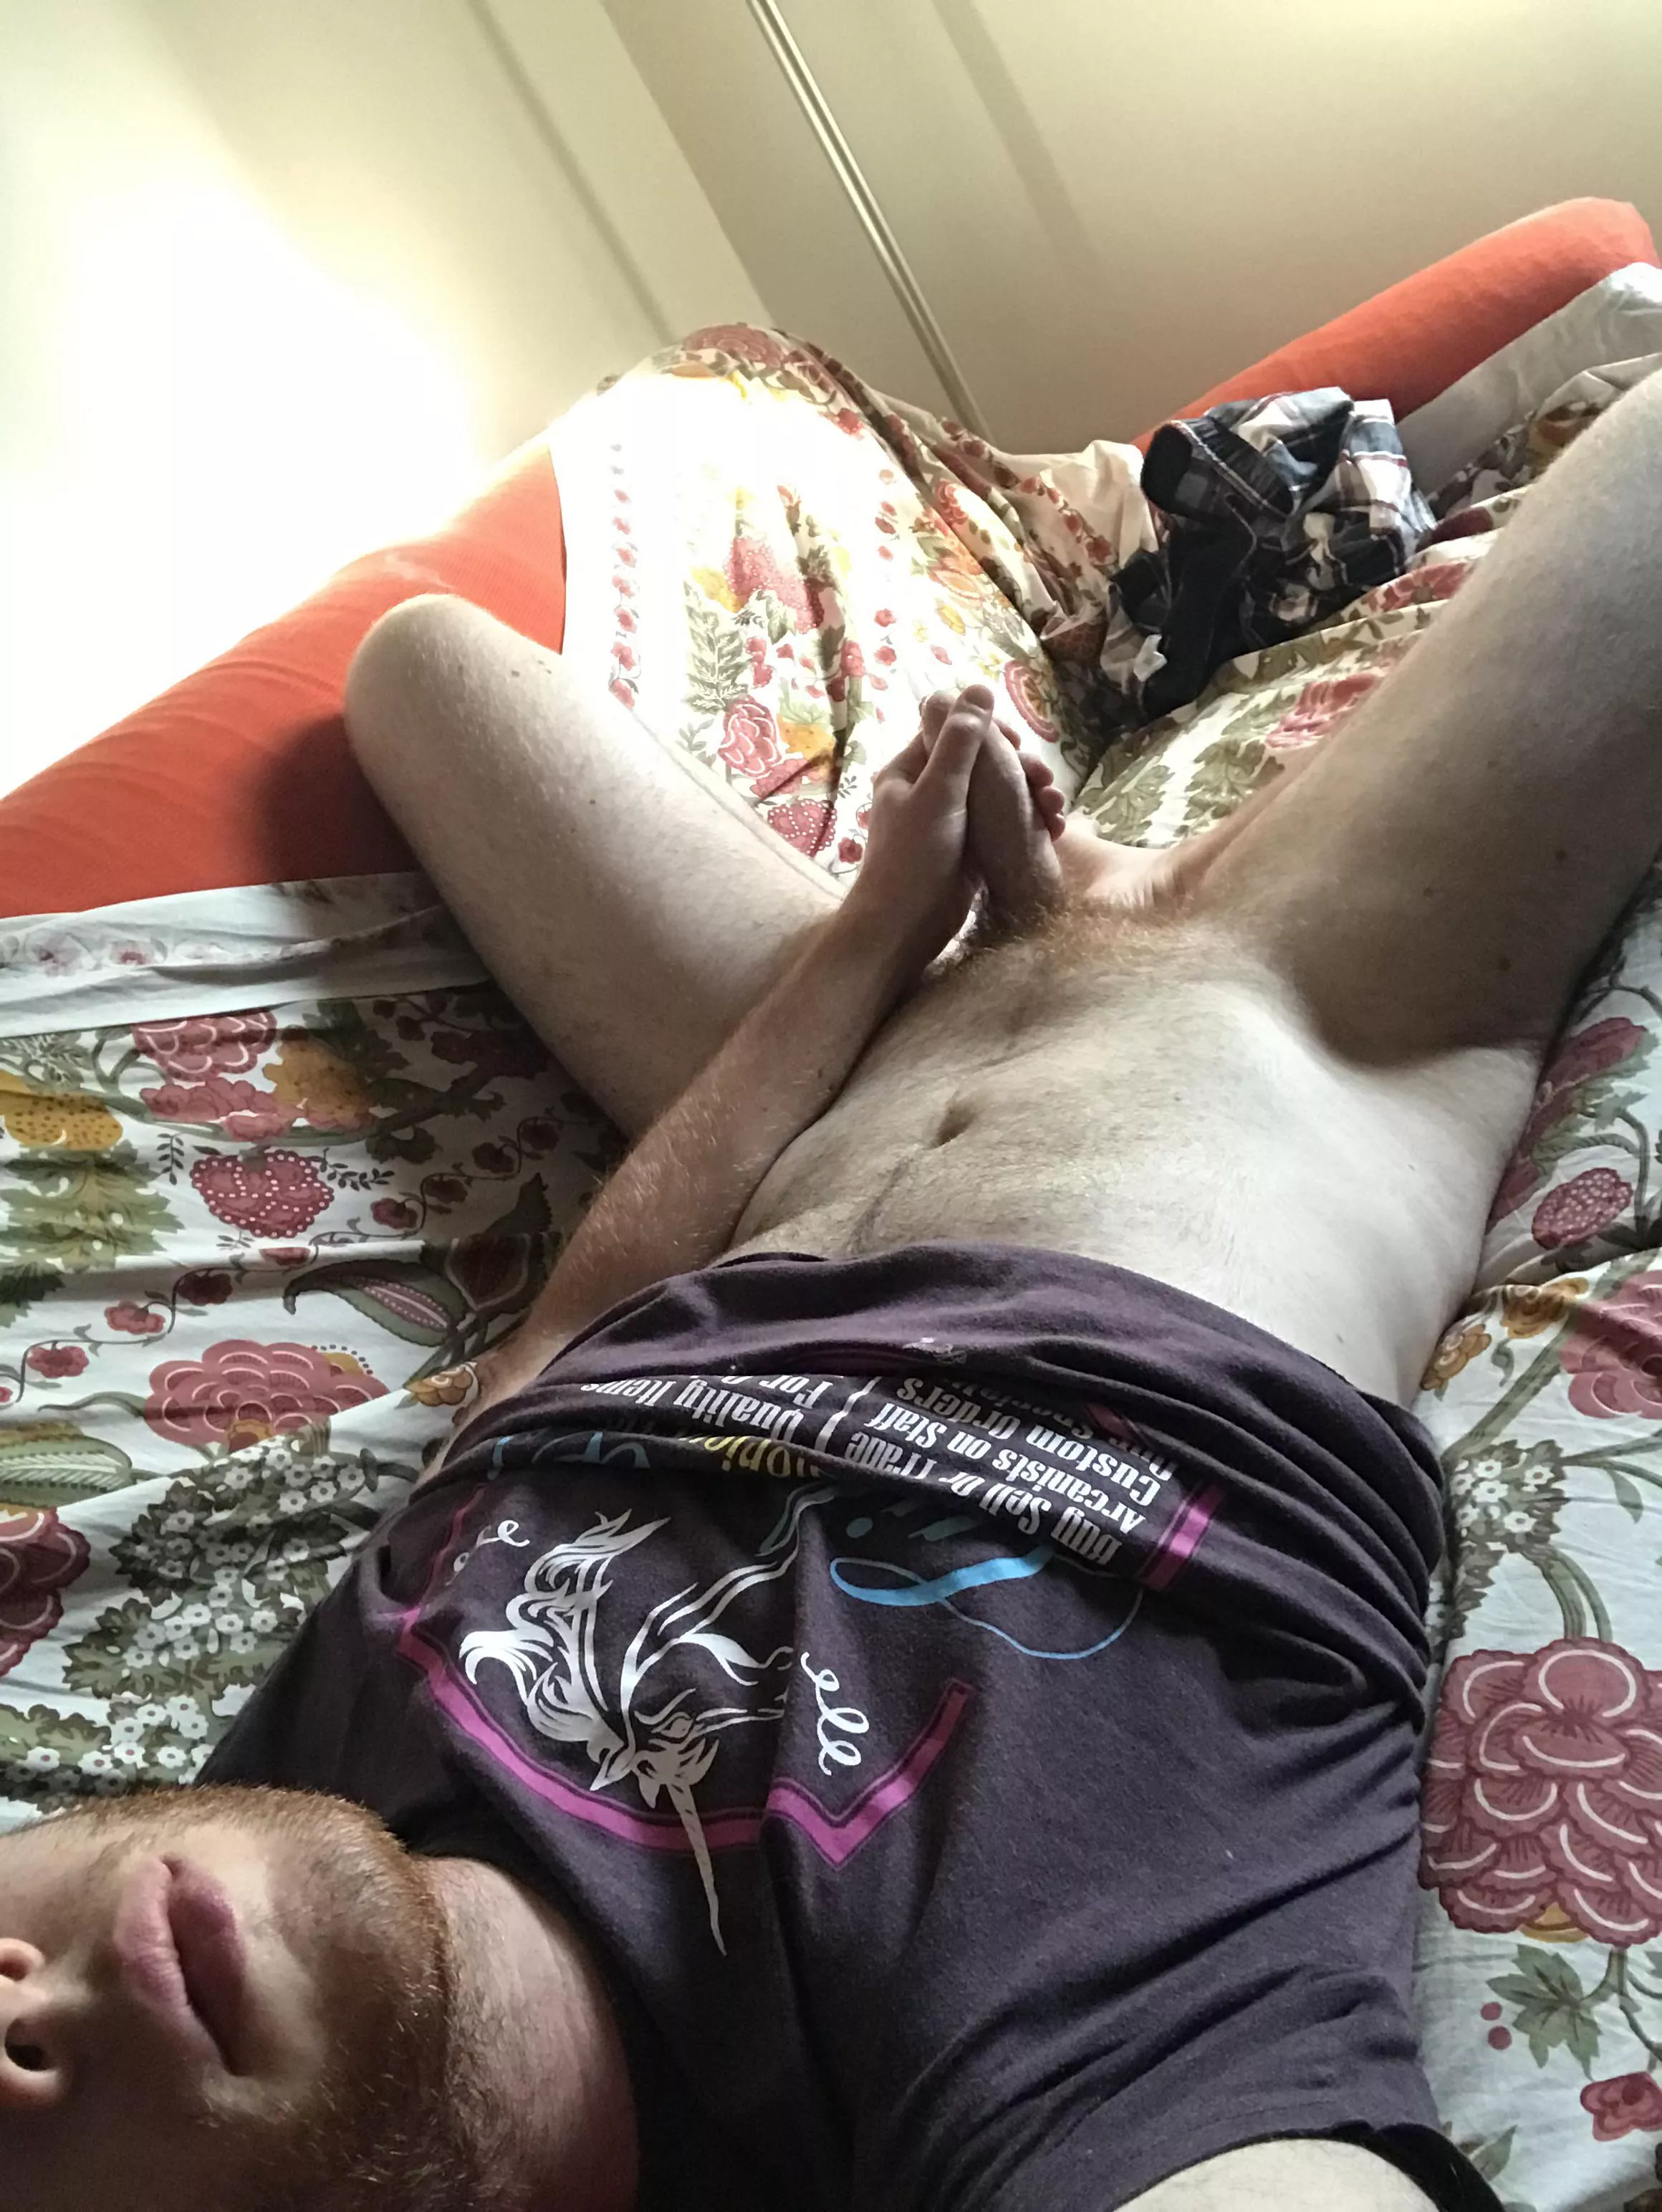 Horny Afternoon